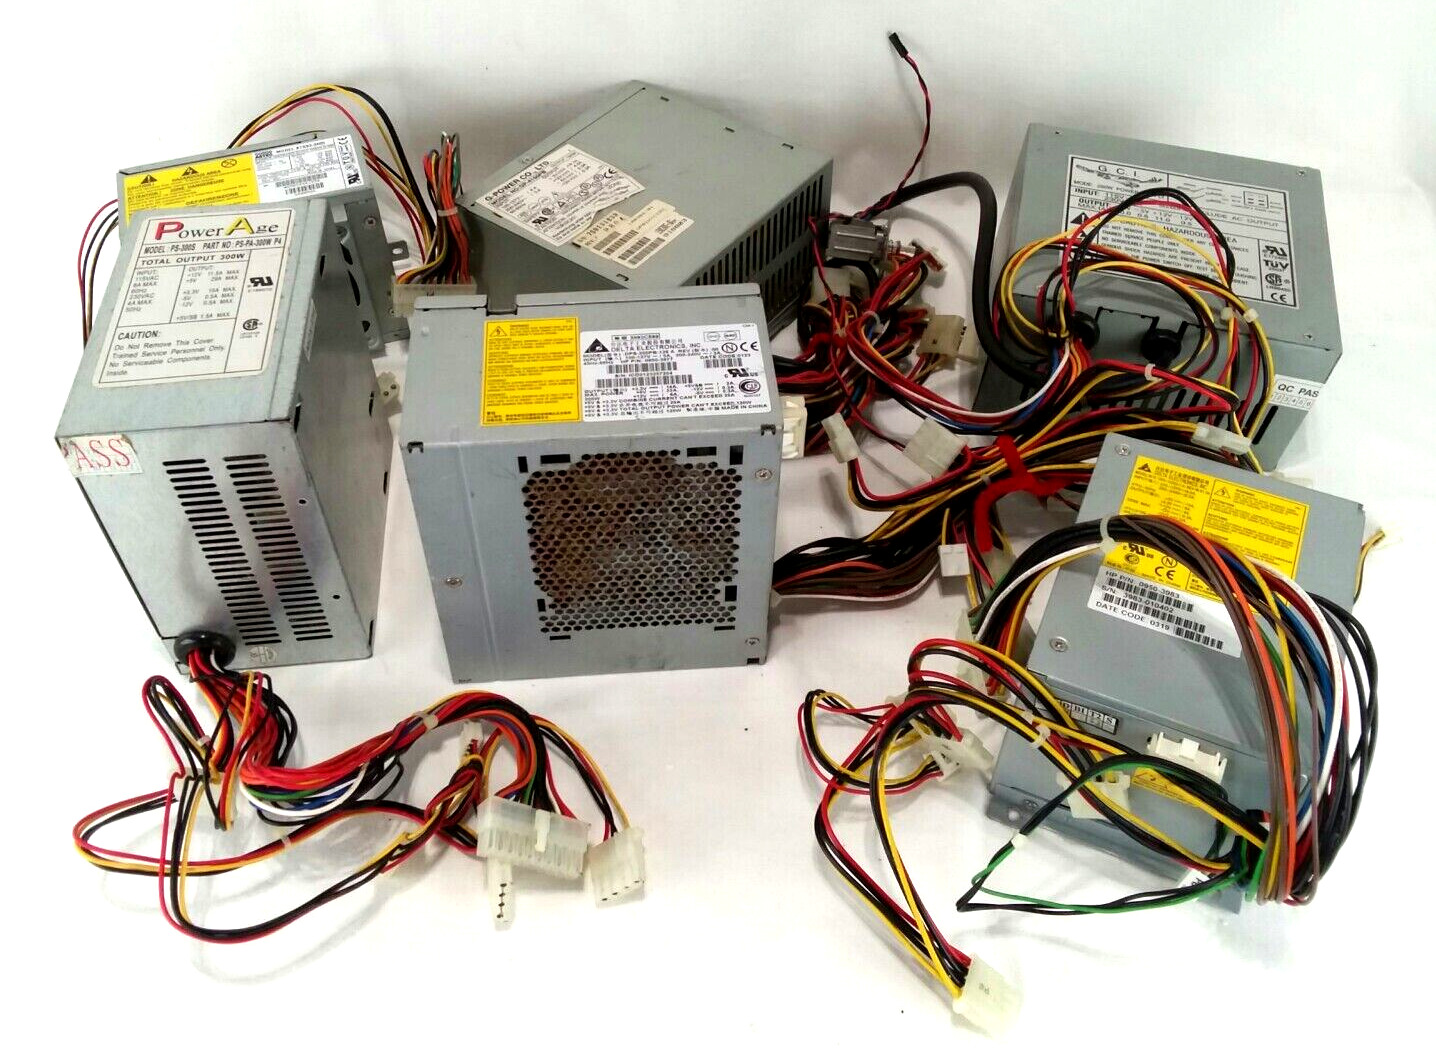 LOT OF 6 - Different Assorted Computer Power Supply Units w/ Wiring - untested